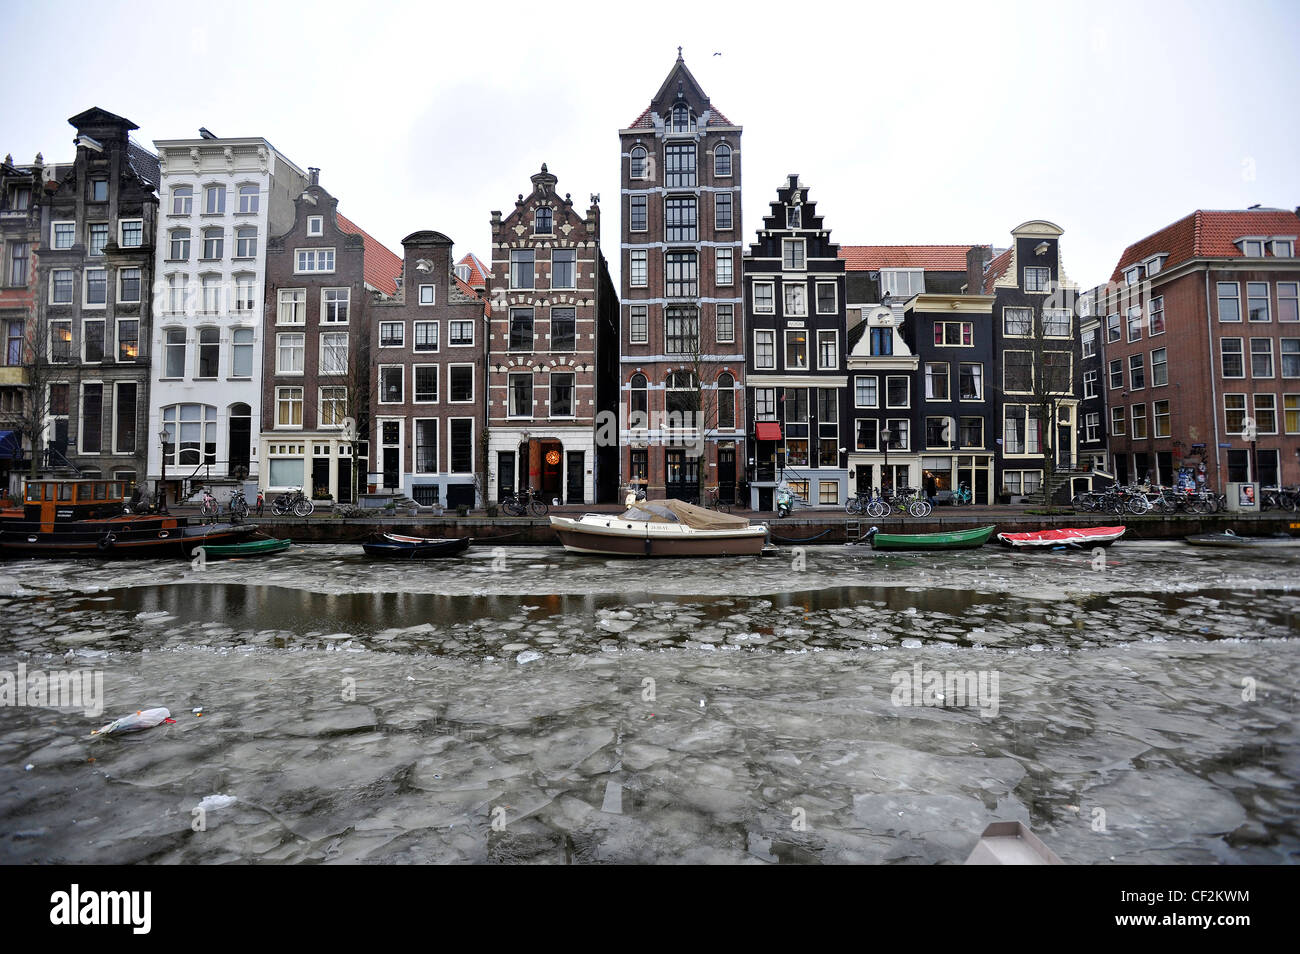 Typical Amsterdam buildings overlooking a frozen canal in Amsterdam, Netherlands. Stock Photo